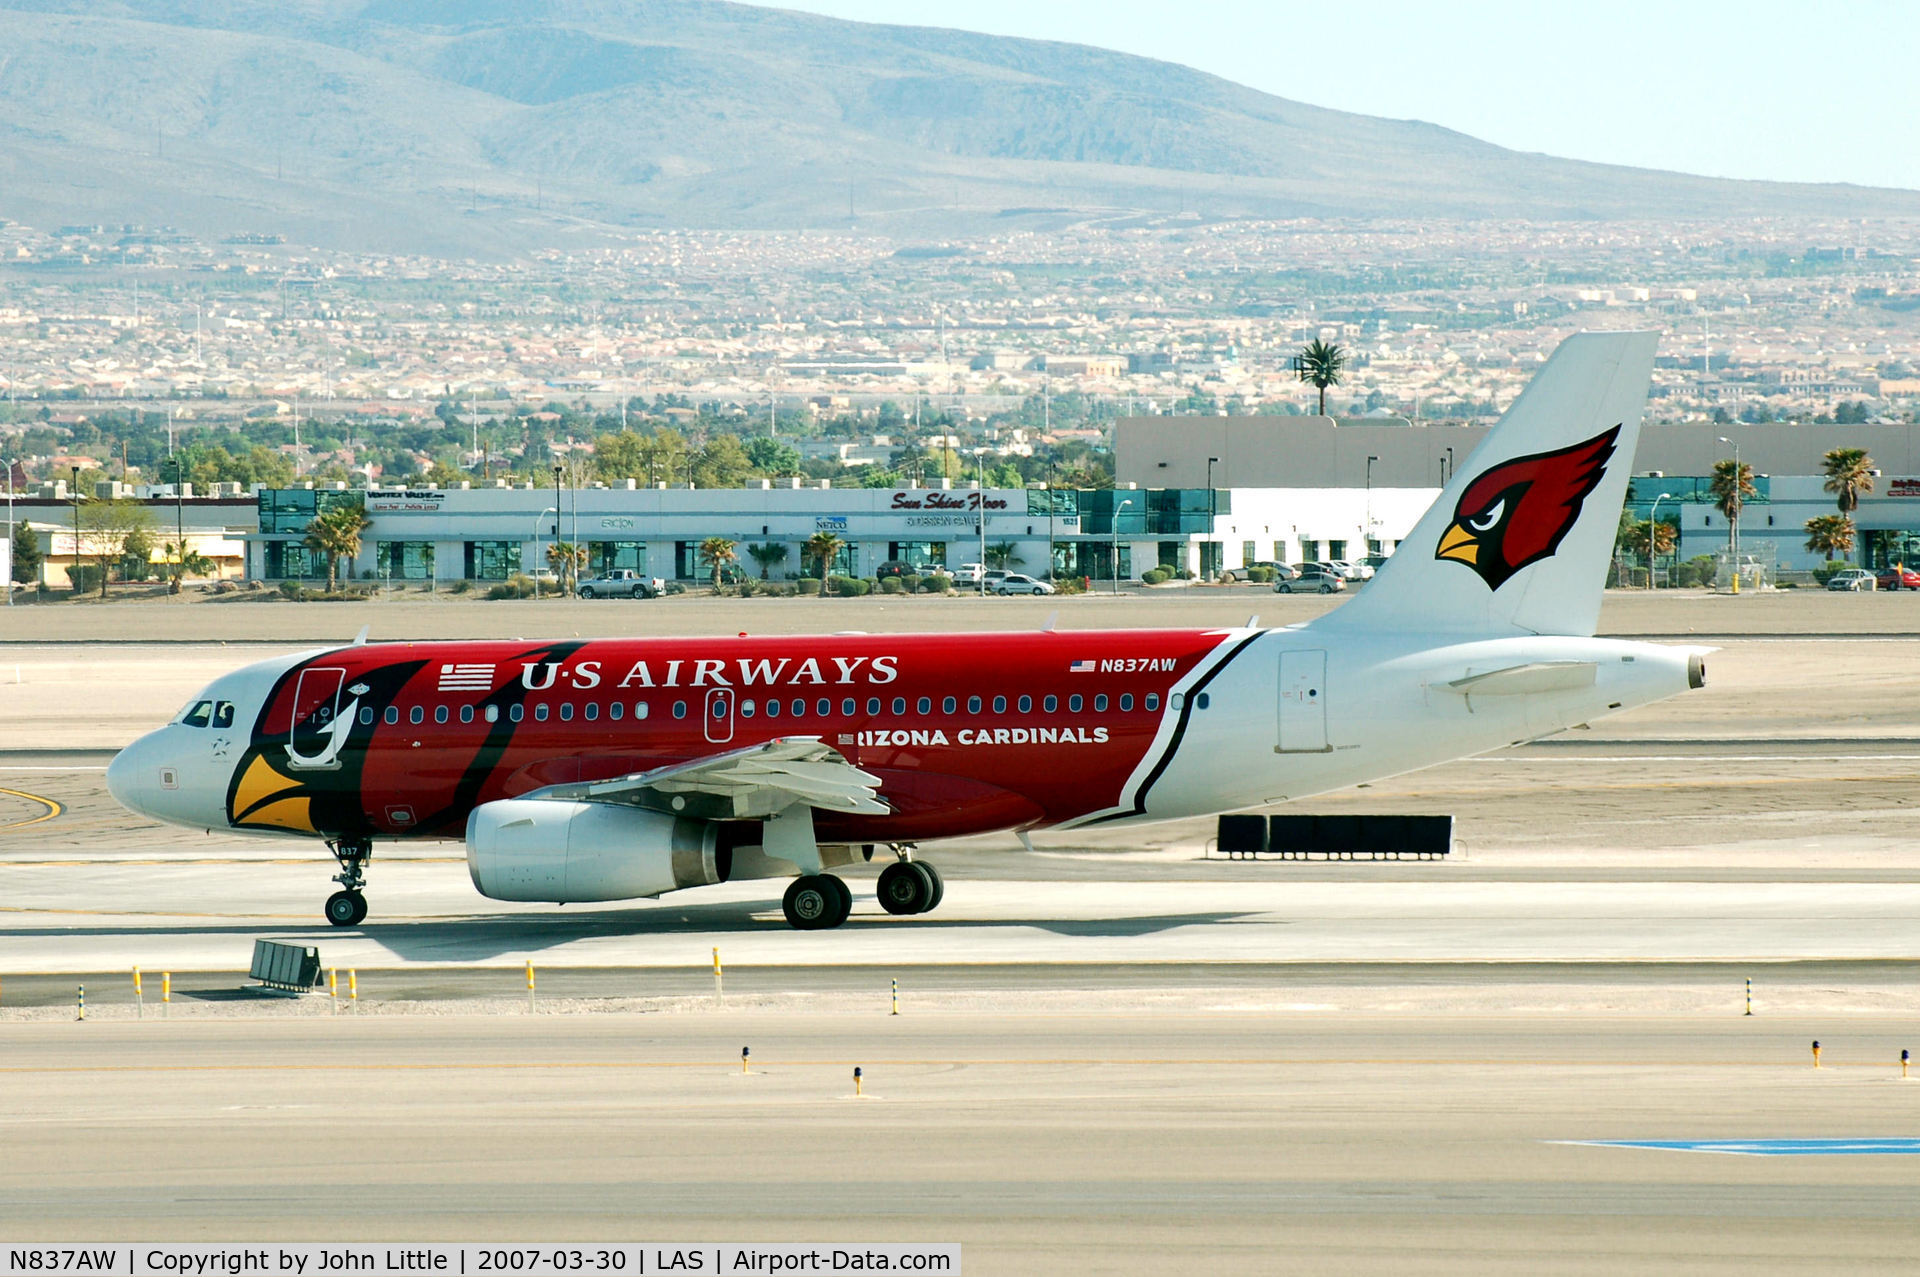 N837AW, 2005 Airbus A319-132 C/N 2595, America West painted up for Arizona Cardinals